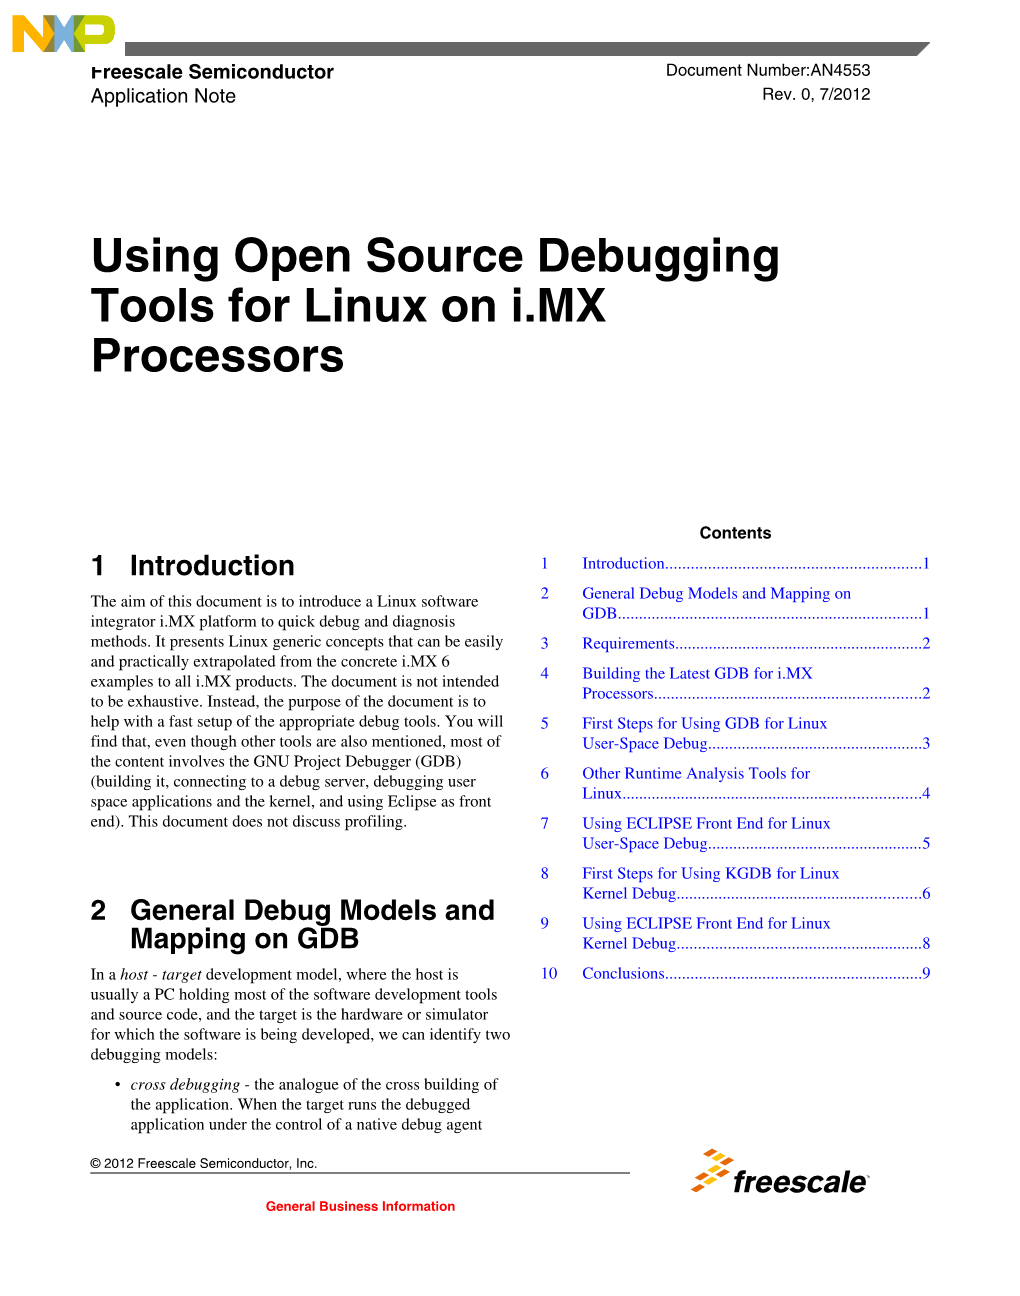 Using Open Source Debugging Tools for Linux on I.MX Processors